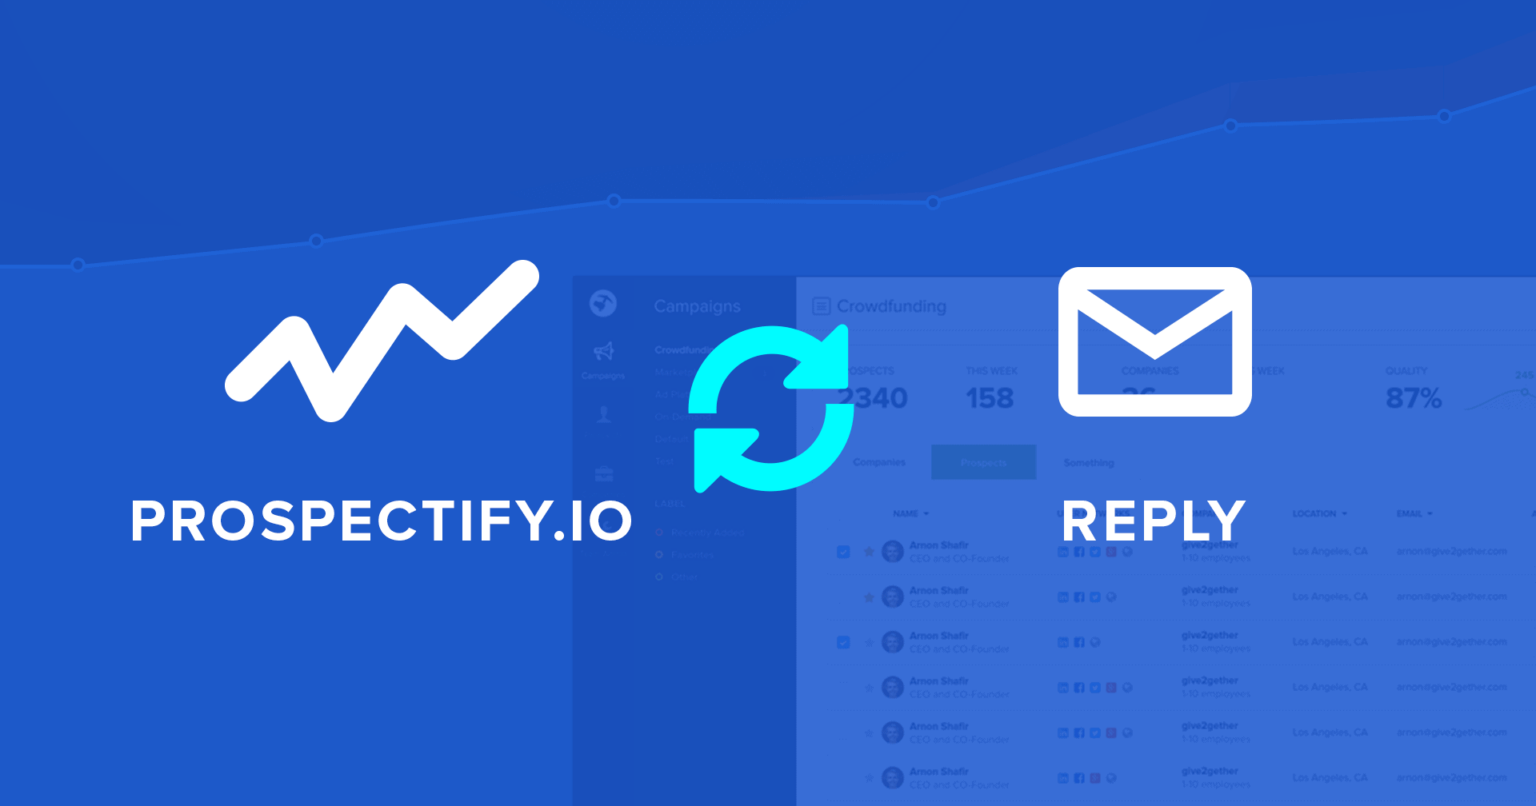 Reply + Prospectify.io = New Integration Launch!